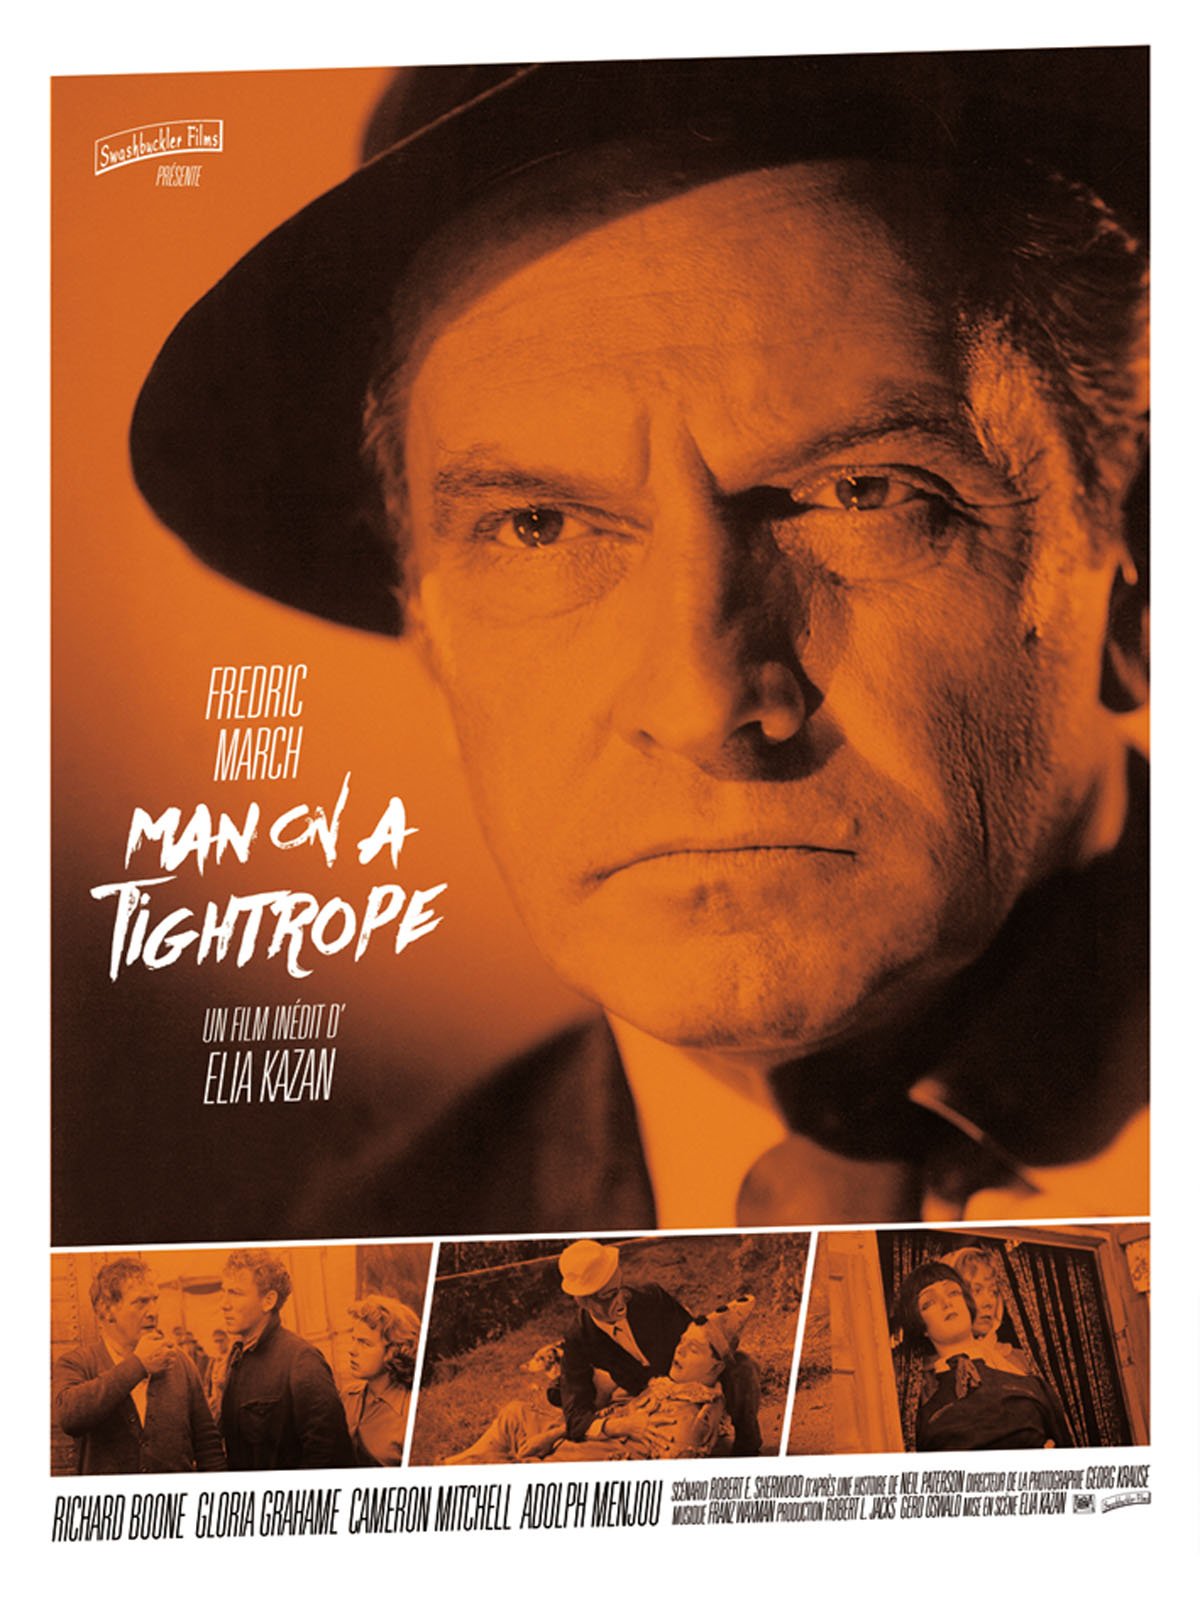 Man on a Tightrope : Affiche